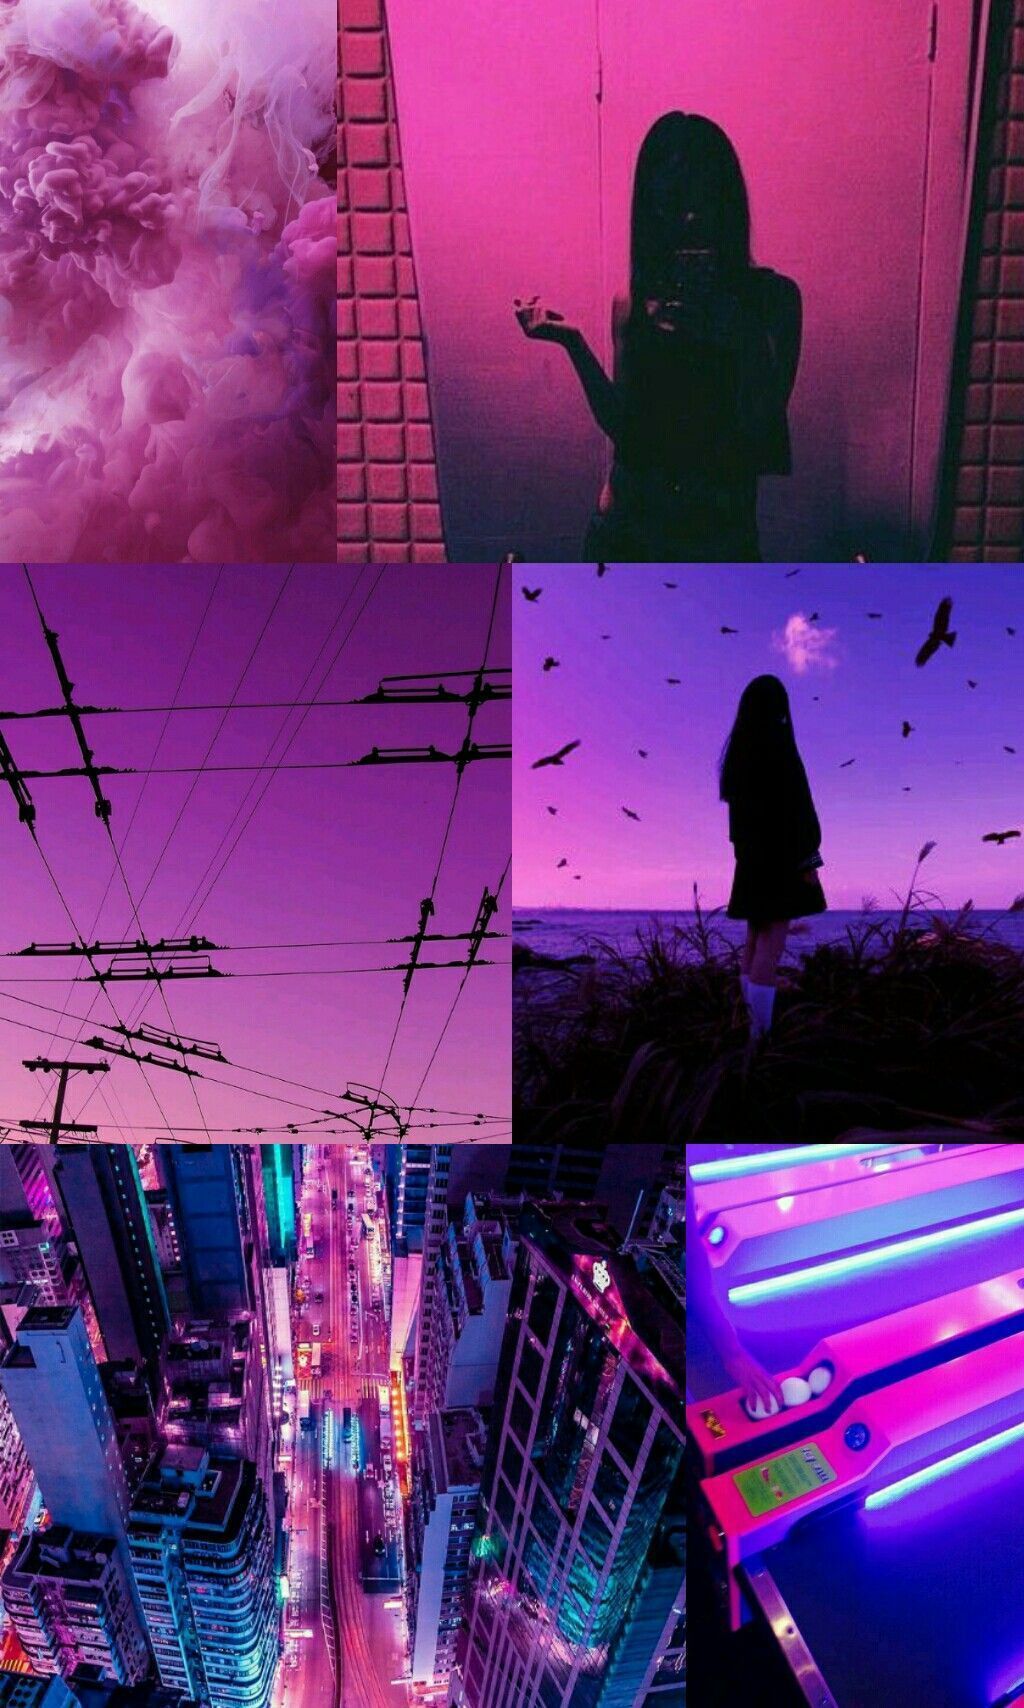 Aesthetic phone background collage of a girl, pink and purple clouds, city lights, and bats. - Magenta